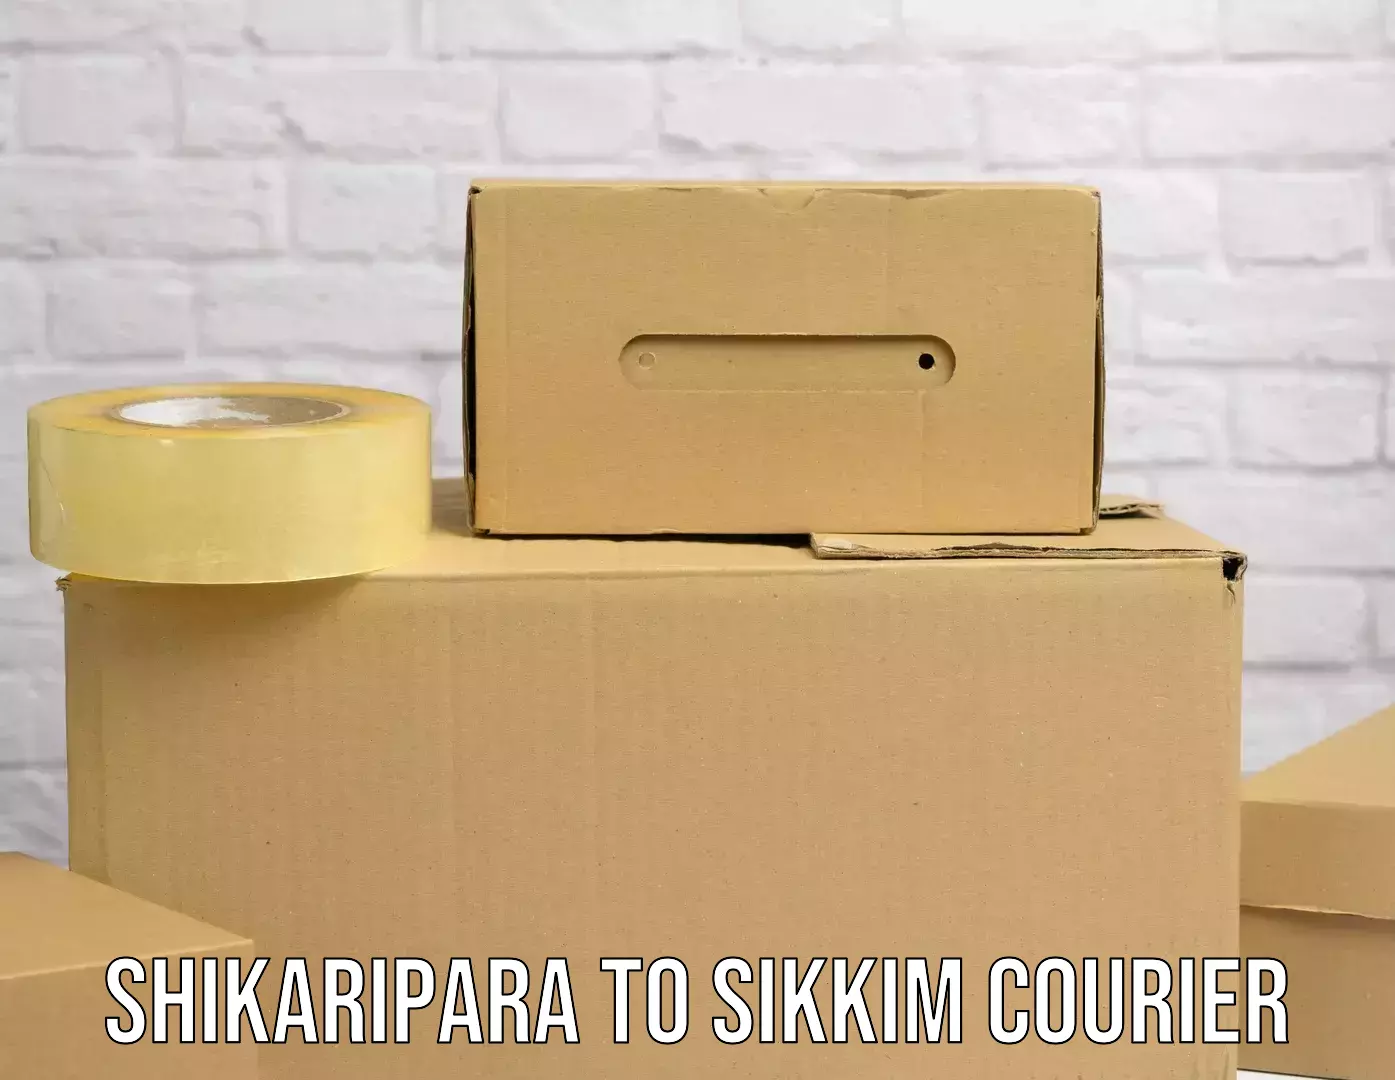 Efficient package consolidation Shikaripara to Sikkim